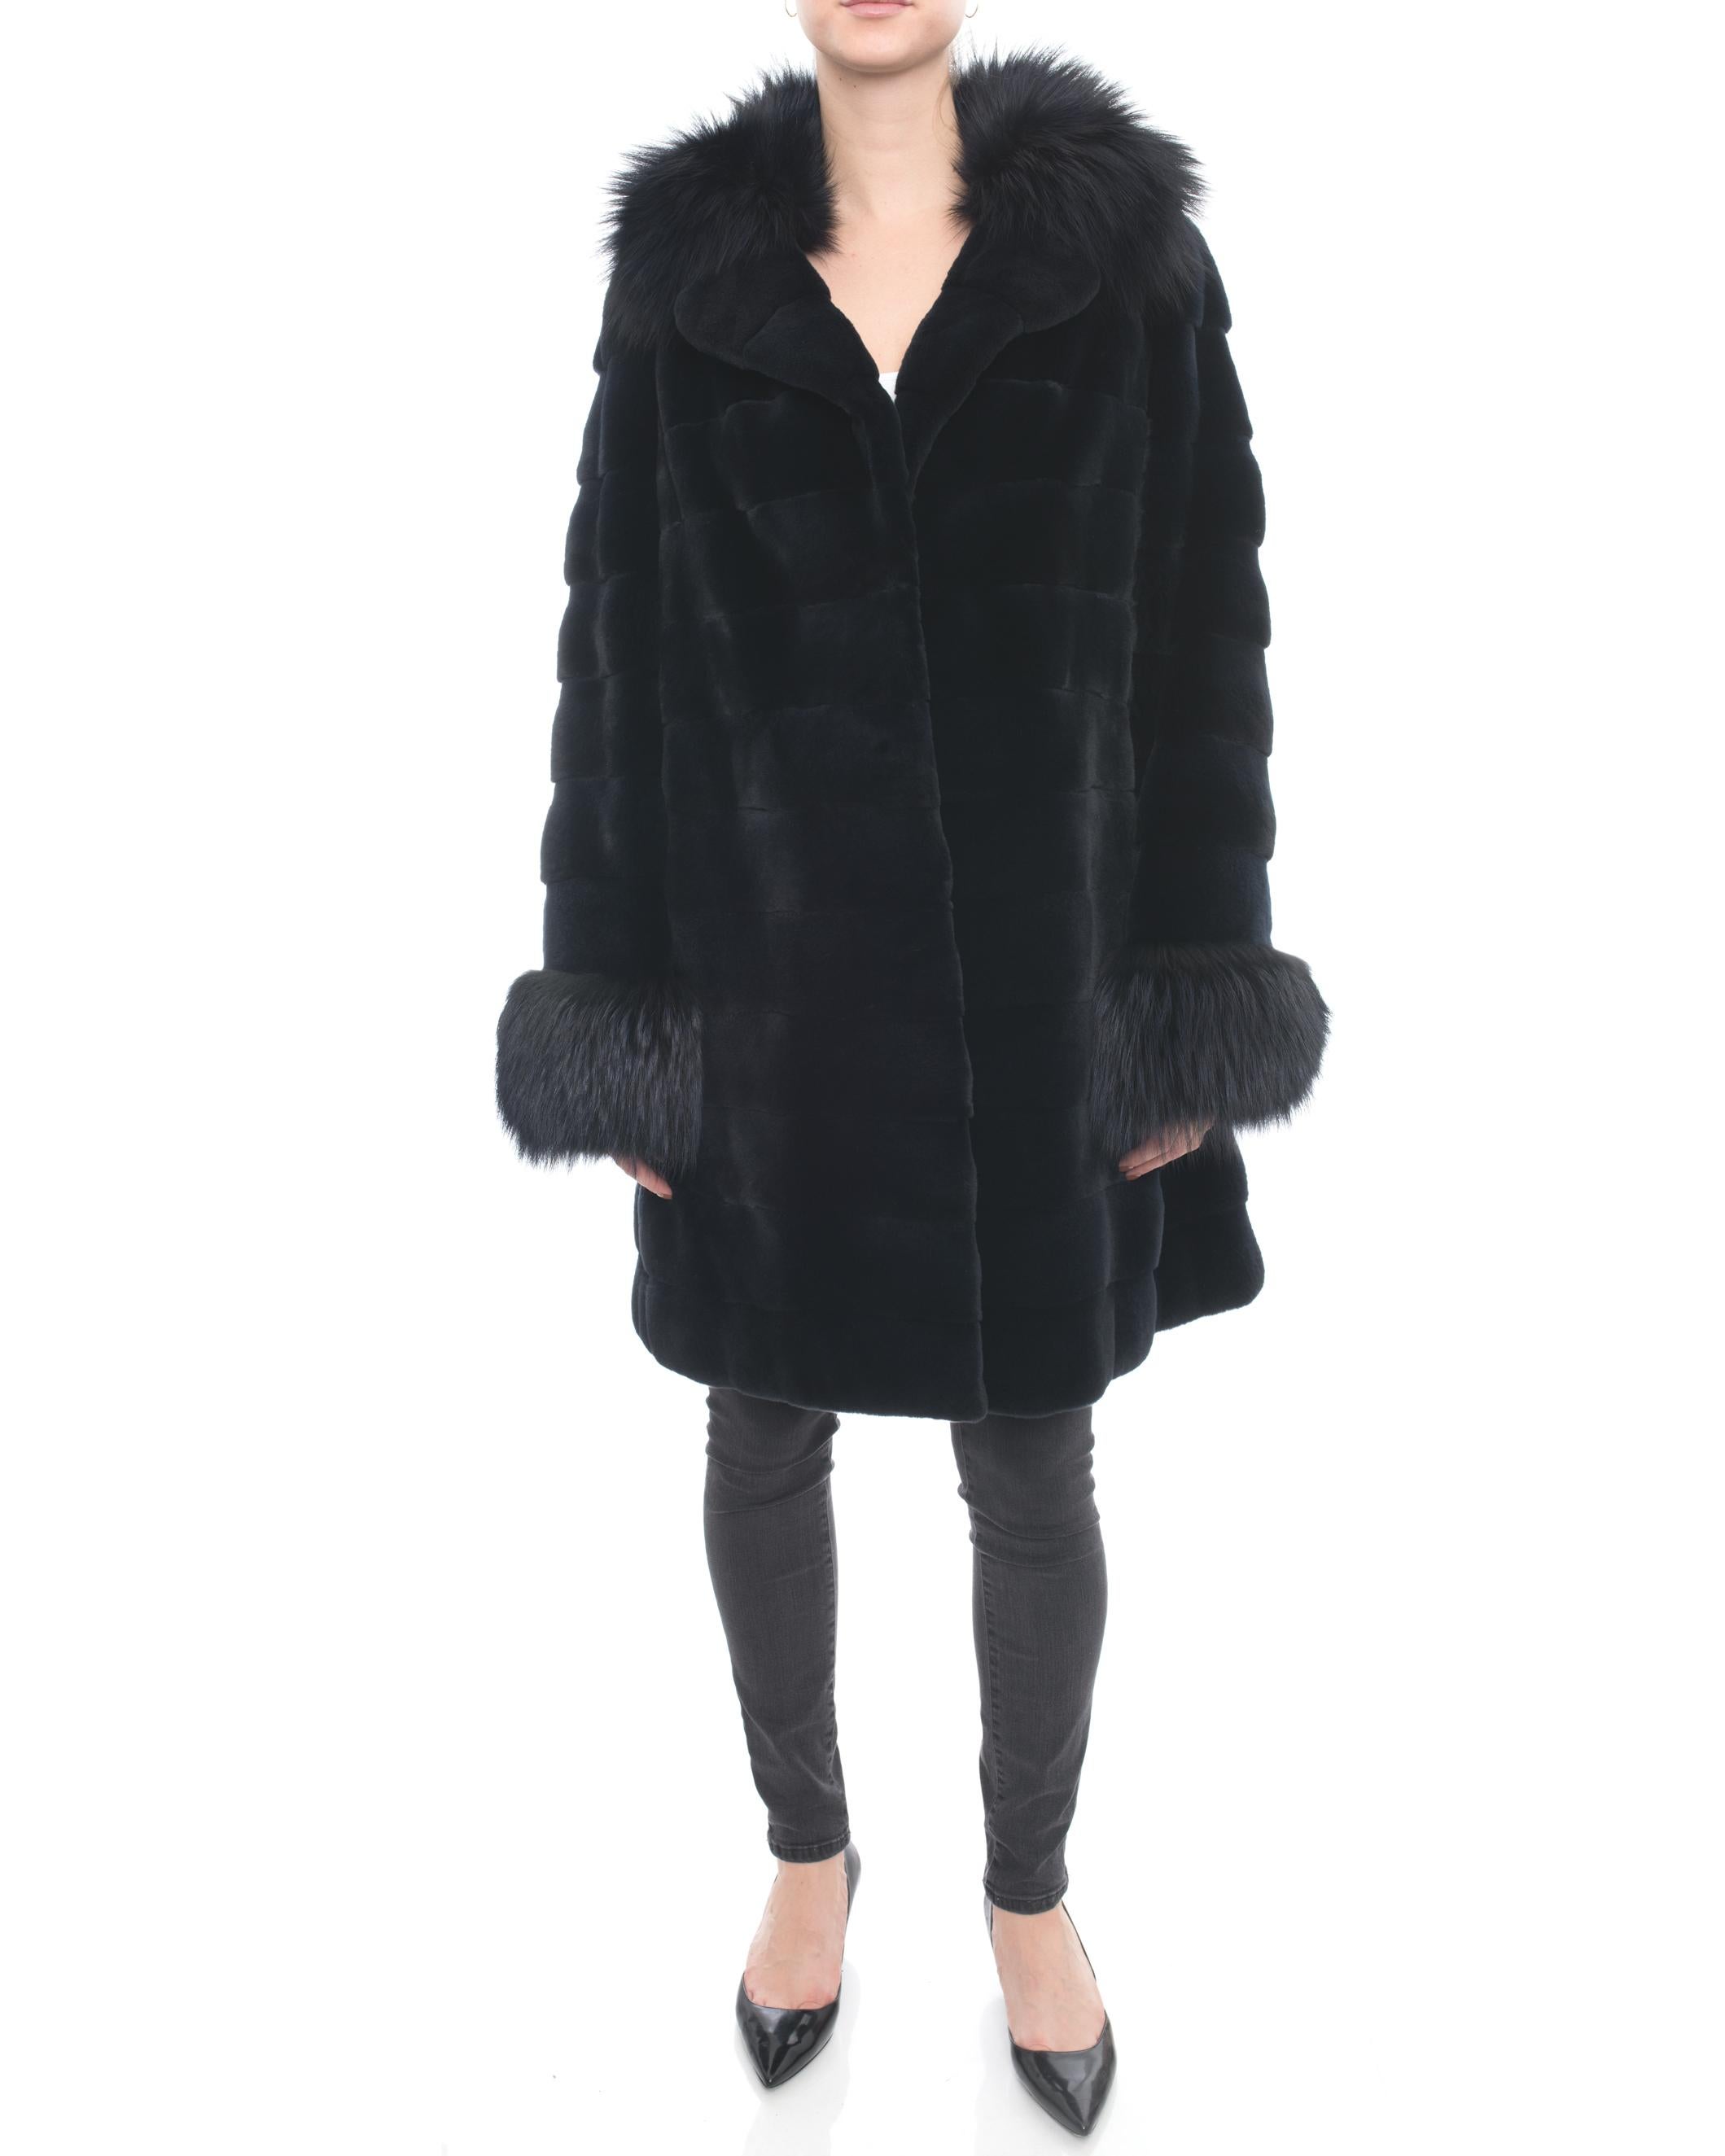 Holt Renfrew Midnight Sheared Mink and Fox Fur Trim Coat.  Original retail $5500+. Colour is a very dark midnight navy that appears close to black. Fastens with hook closures at front, side pockets on seam, 100% silk lined.  Marked size USA 12. 